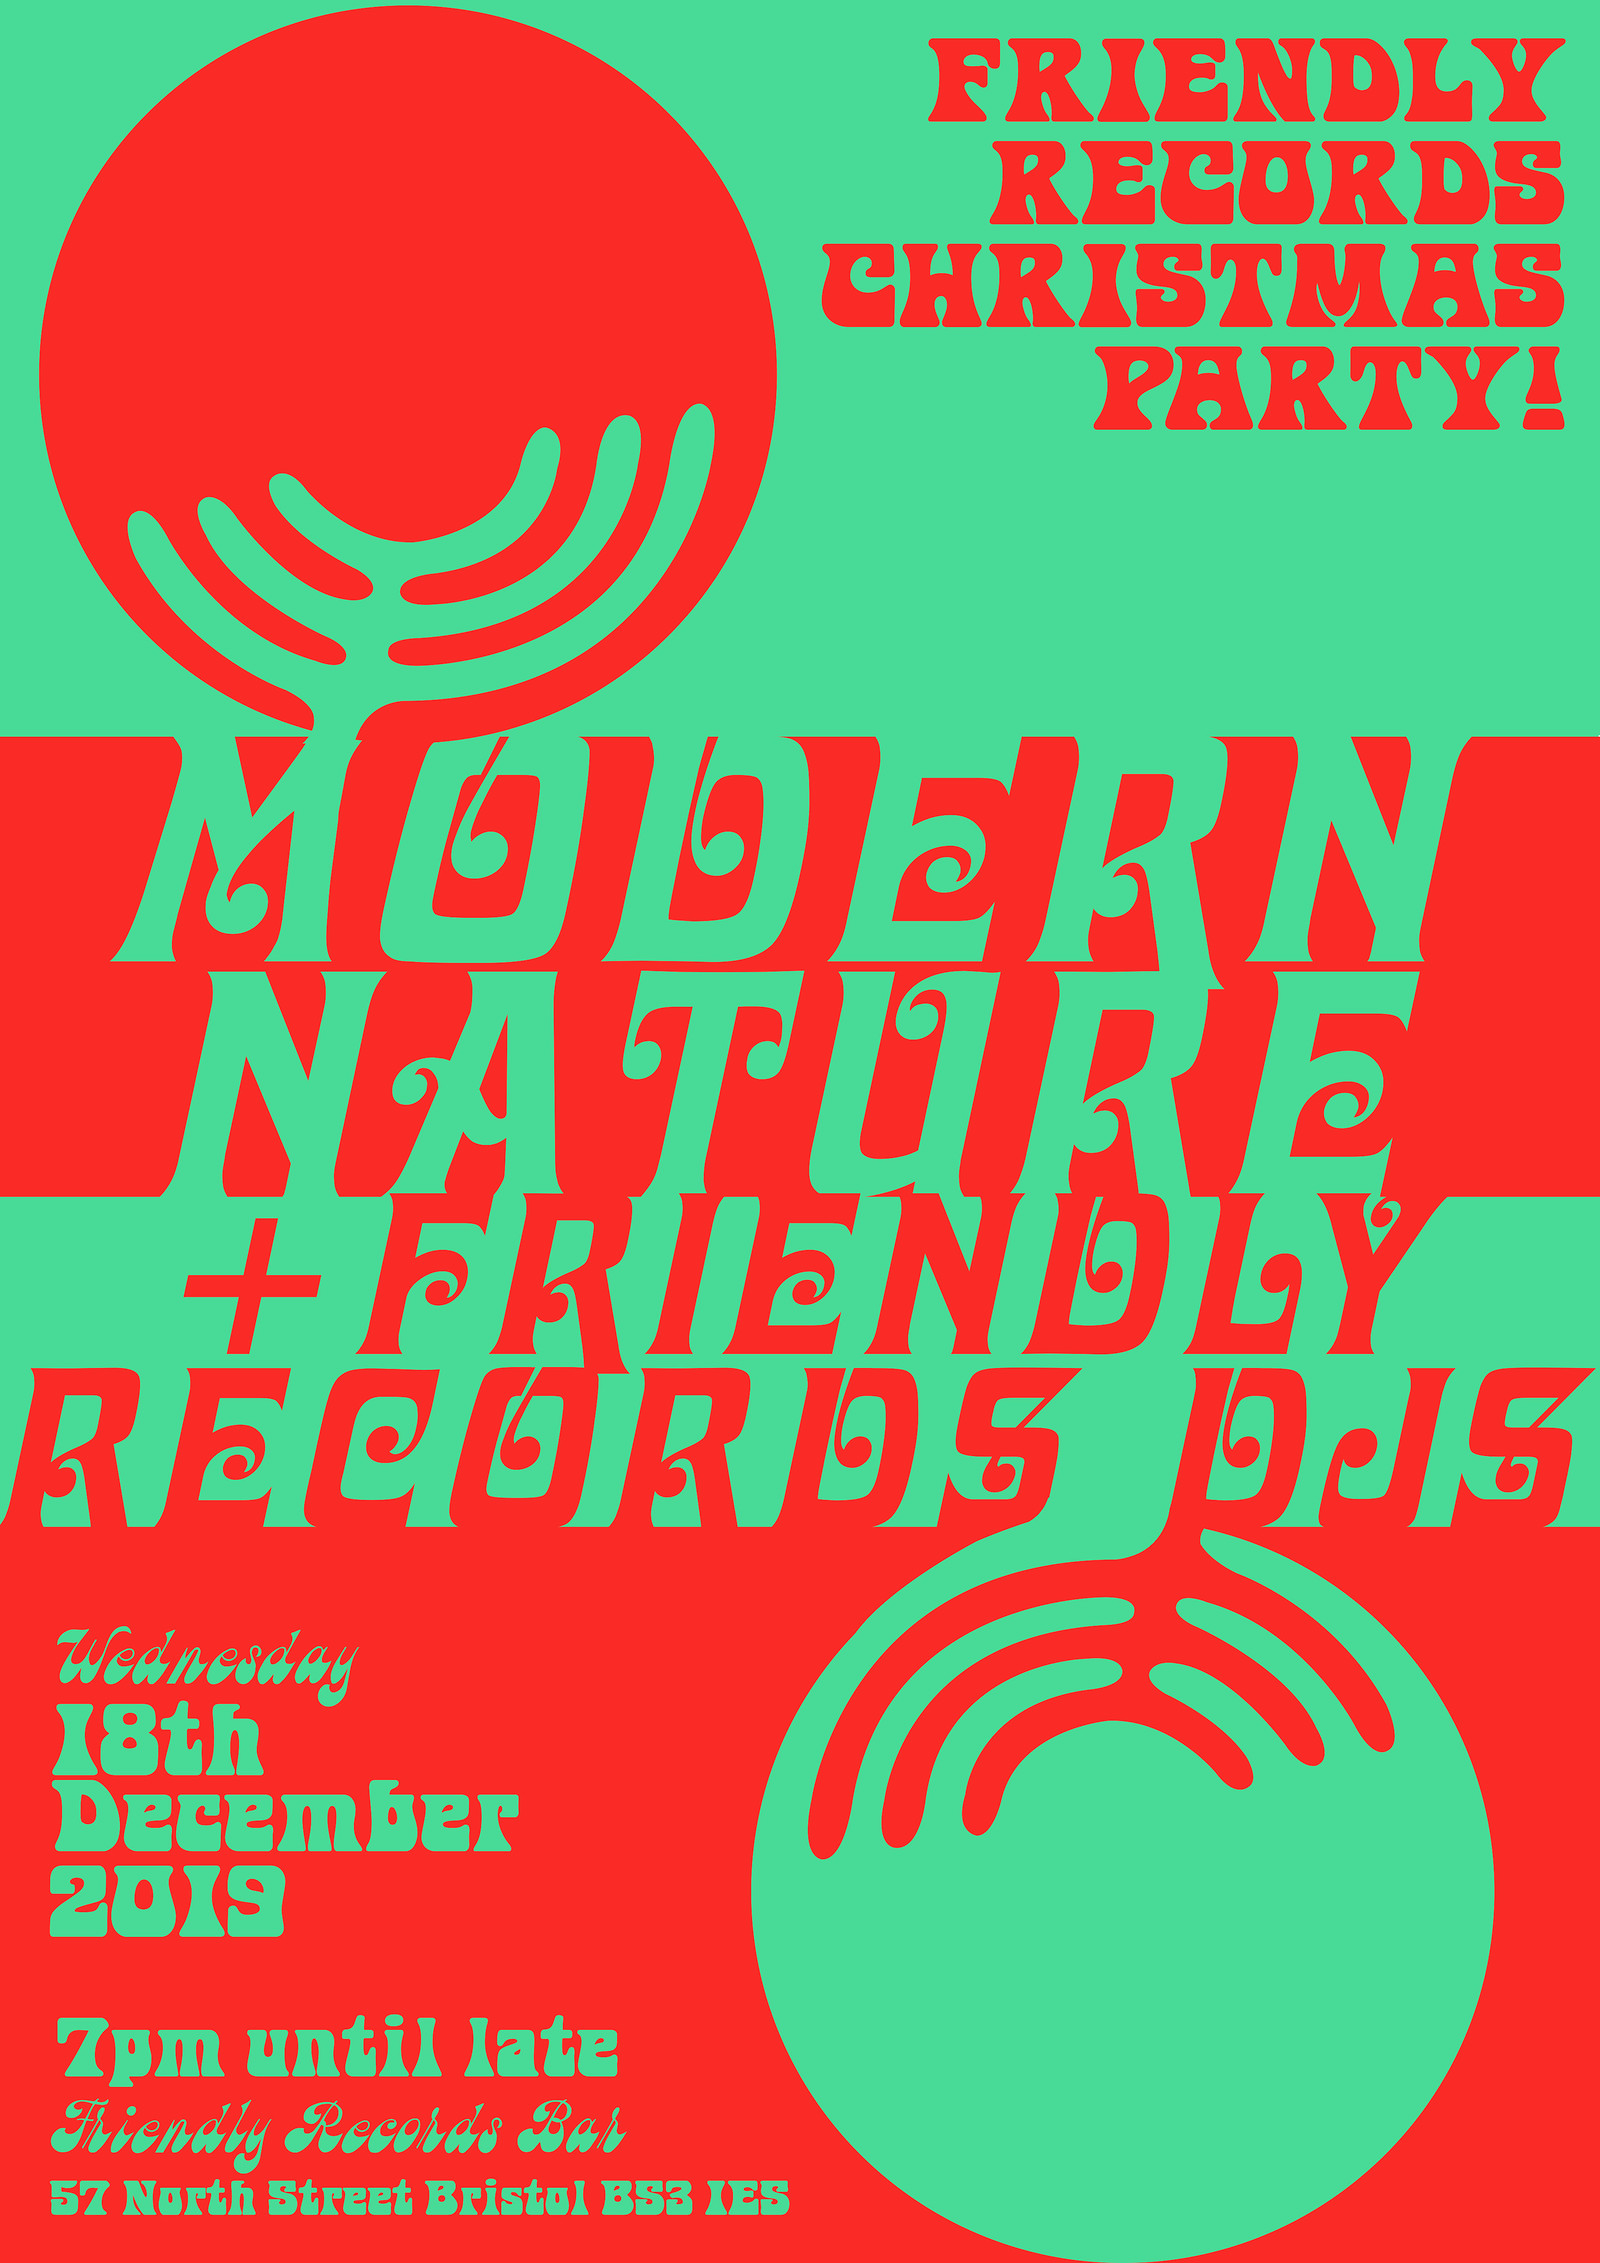 Friendly Records Christmas Party w/ Modern Nature at Friendly Records Bar